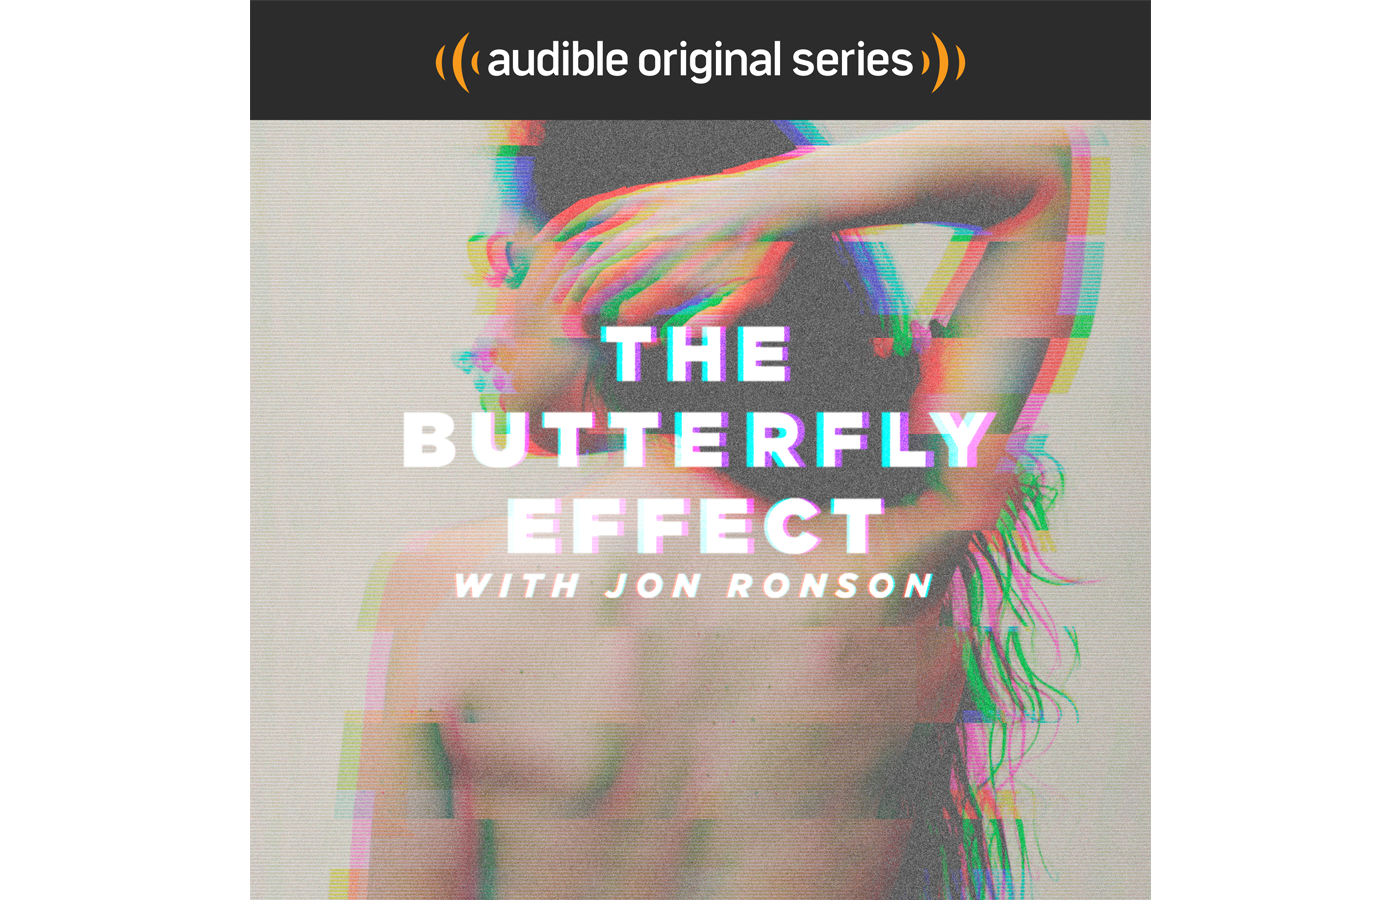 The Butterfly Effect with Jon Ronson